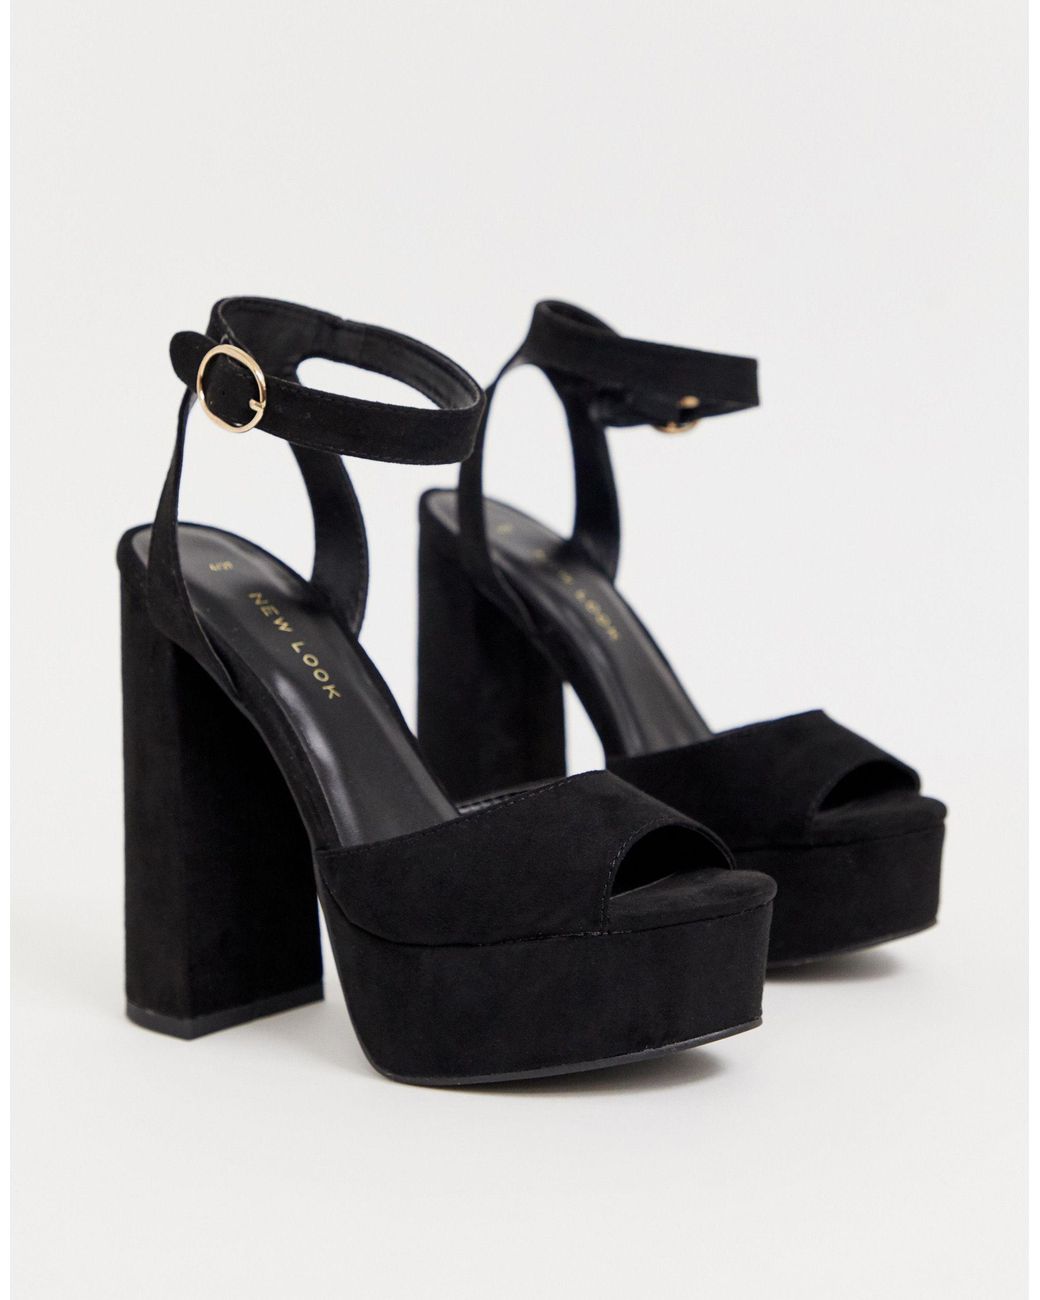 Buy New Look Suedette Tie Up Heeled Sandals - Black | Nelly.com